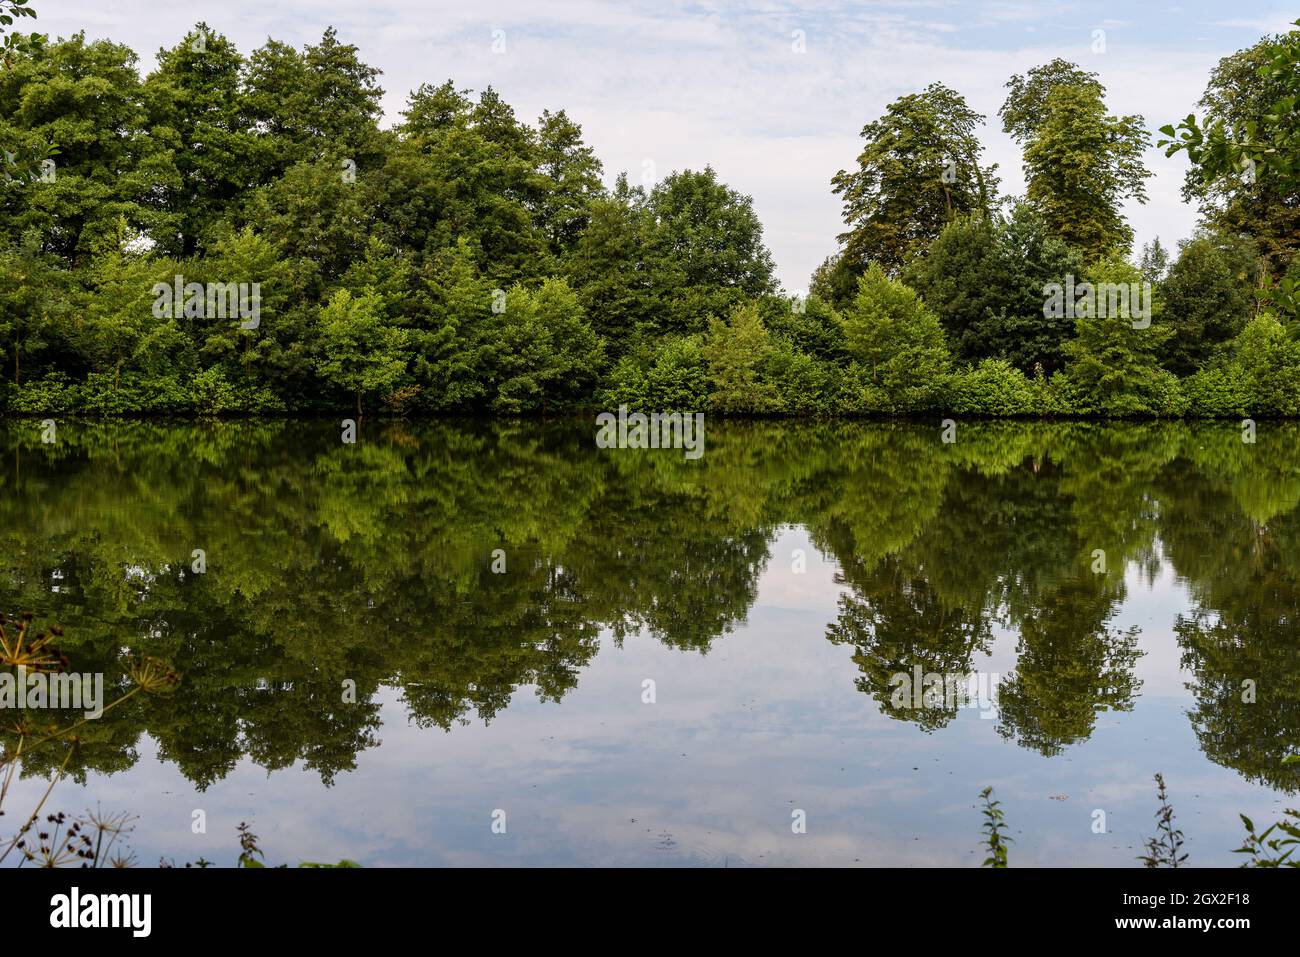 Reflection Of Trees In Lake Against Sky Stock Photo